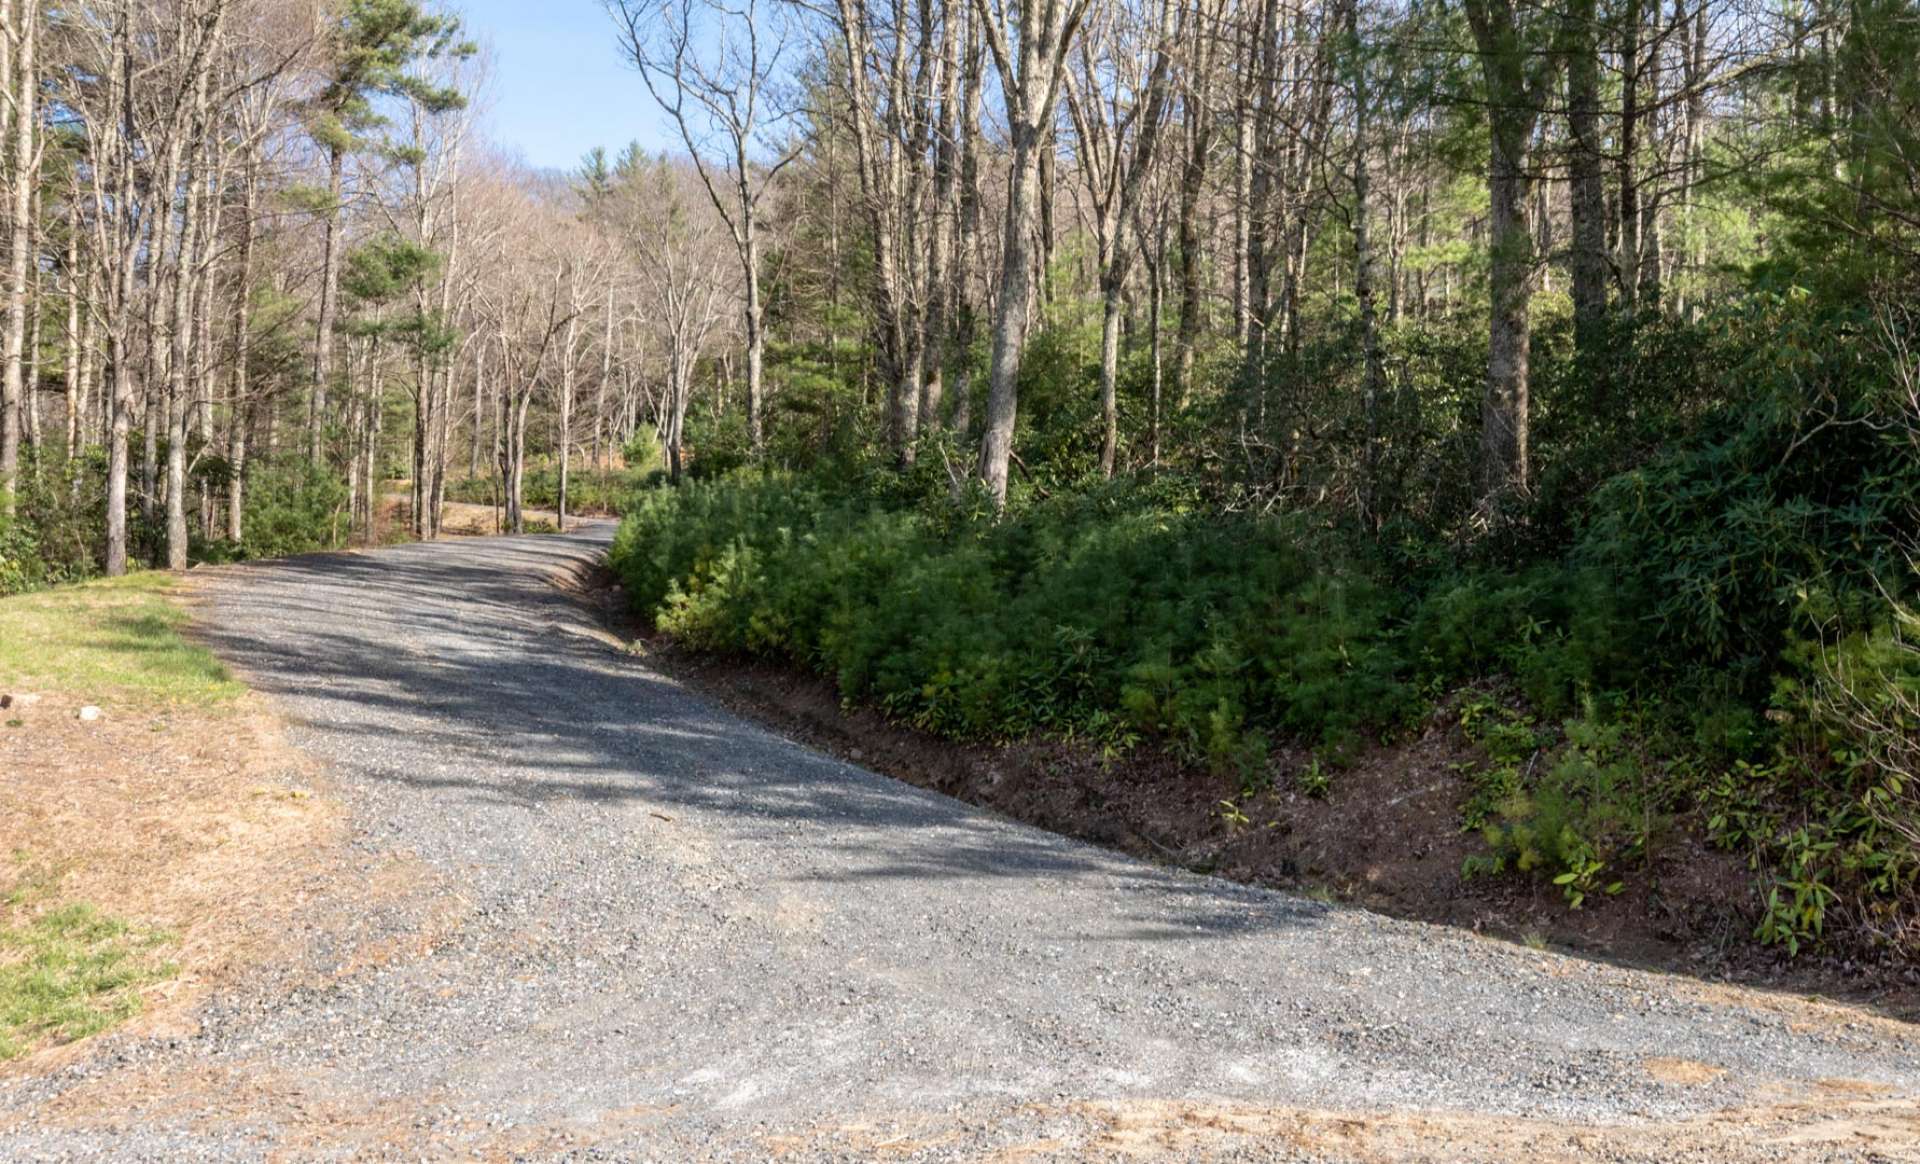 Lot 2 is offered at $22,500 providing an affordable solution to the ideal building site for your NC Mountain home or cabin.  A total of 4 homesites are available.  Purchase all  4 for a discounted price.  Call today for details and additional information on listing J226.  * Broker Interest.